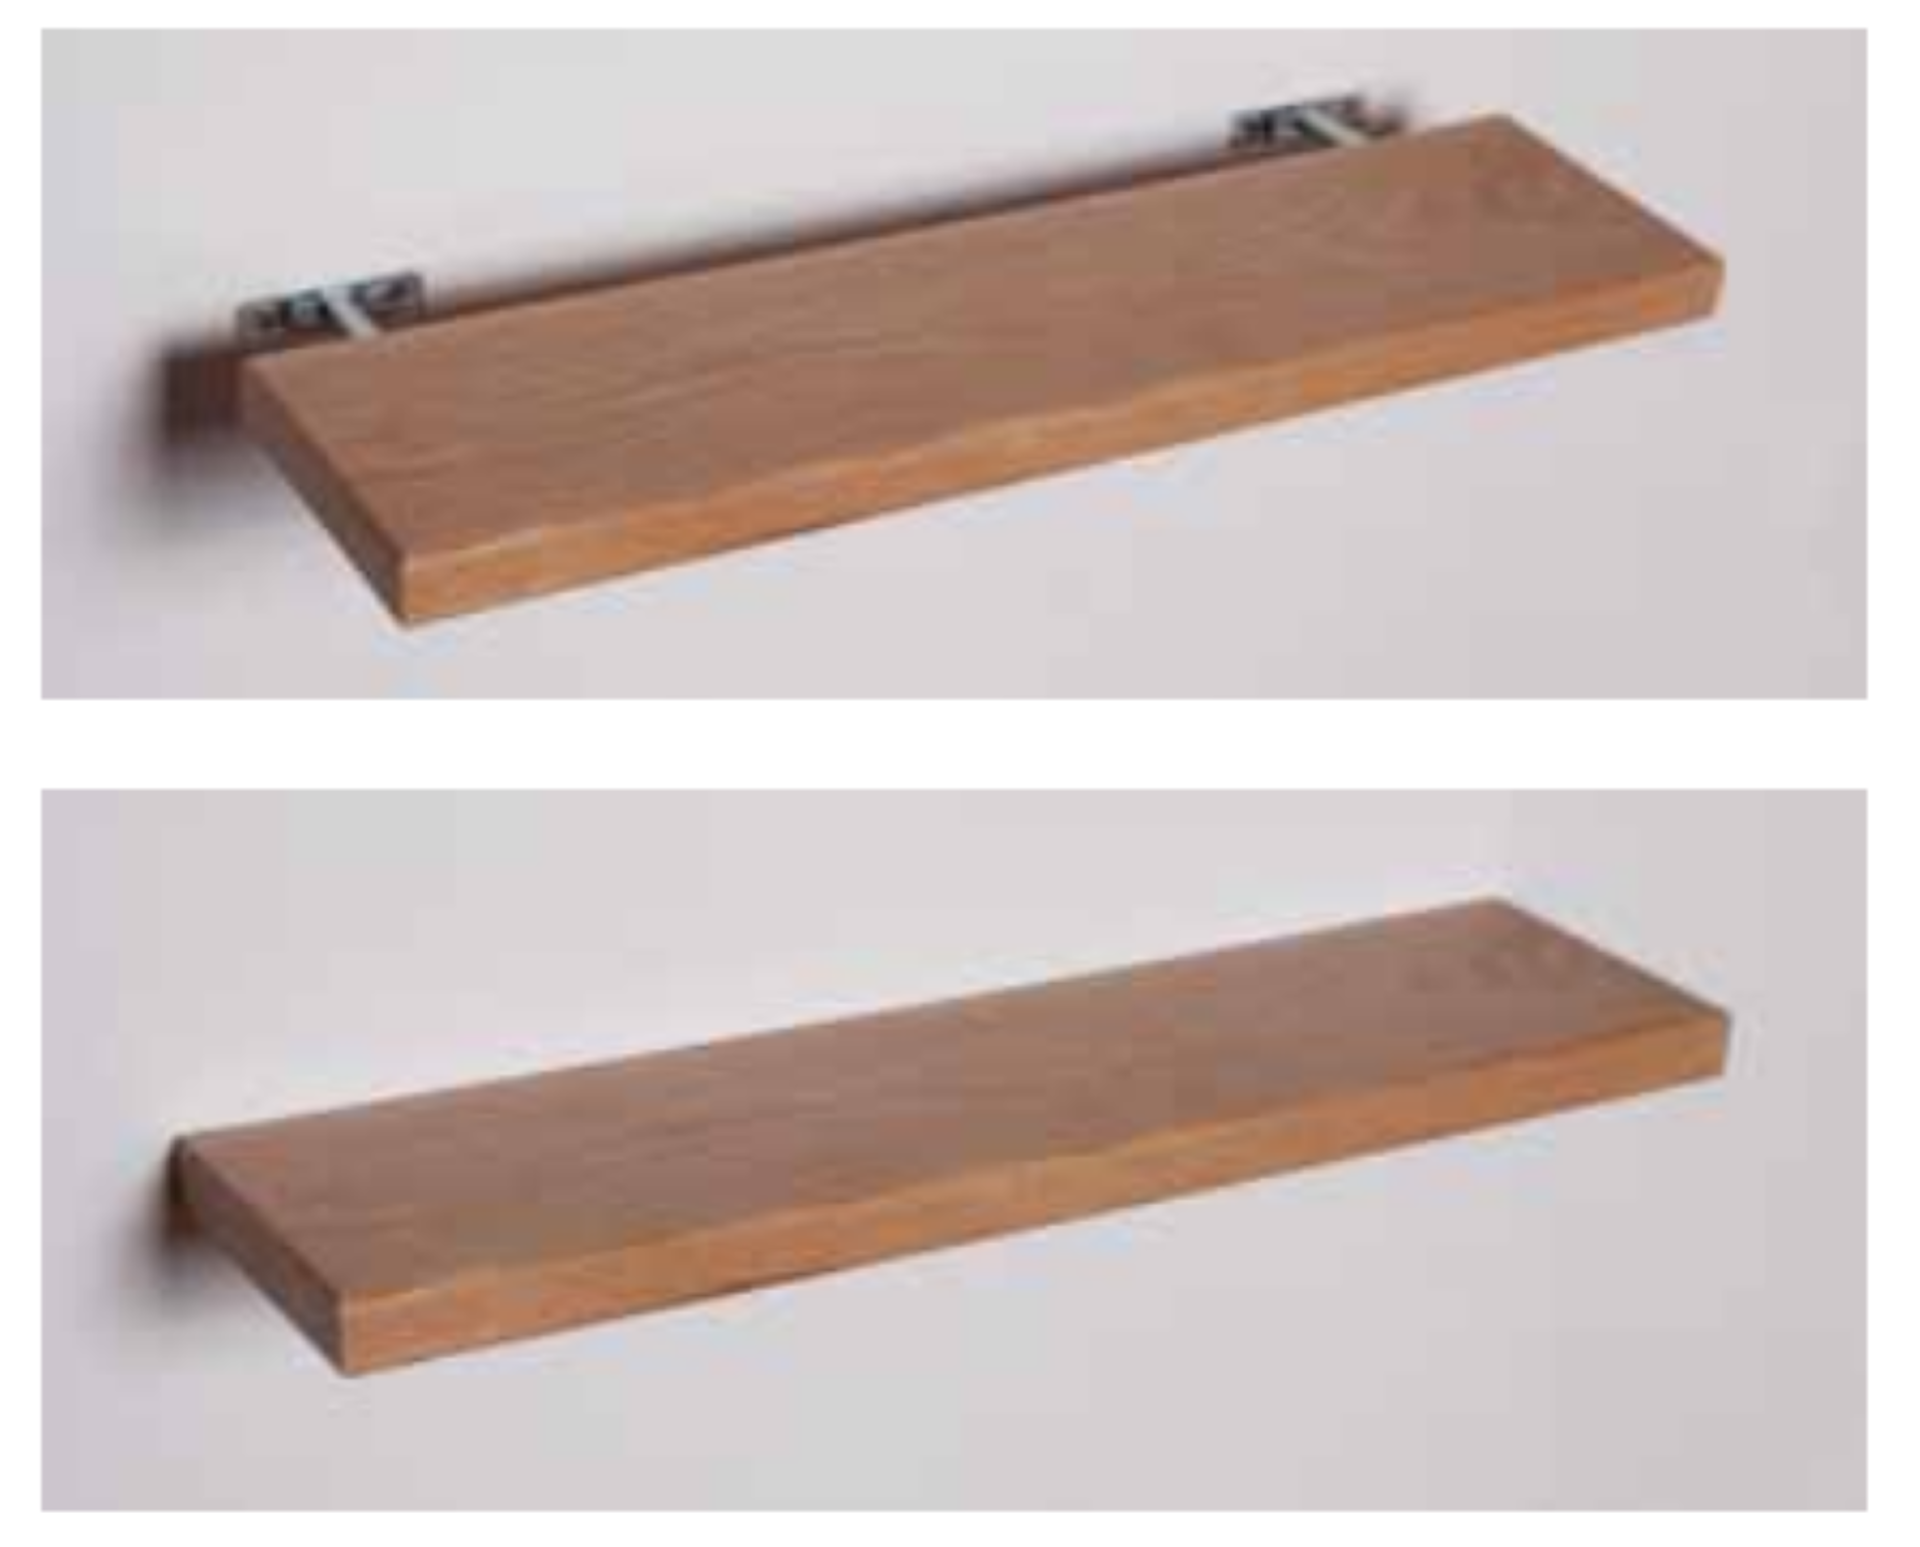 1 x Stonearth Bathroom Storage Shelf With Concealed Brackets - American Solid Walnut - Size: 1500mm - Image 2 of 16